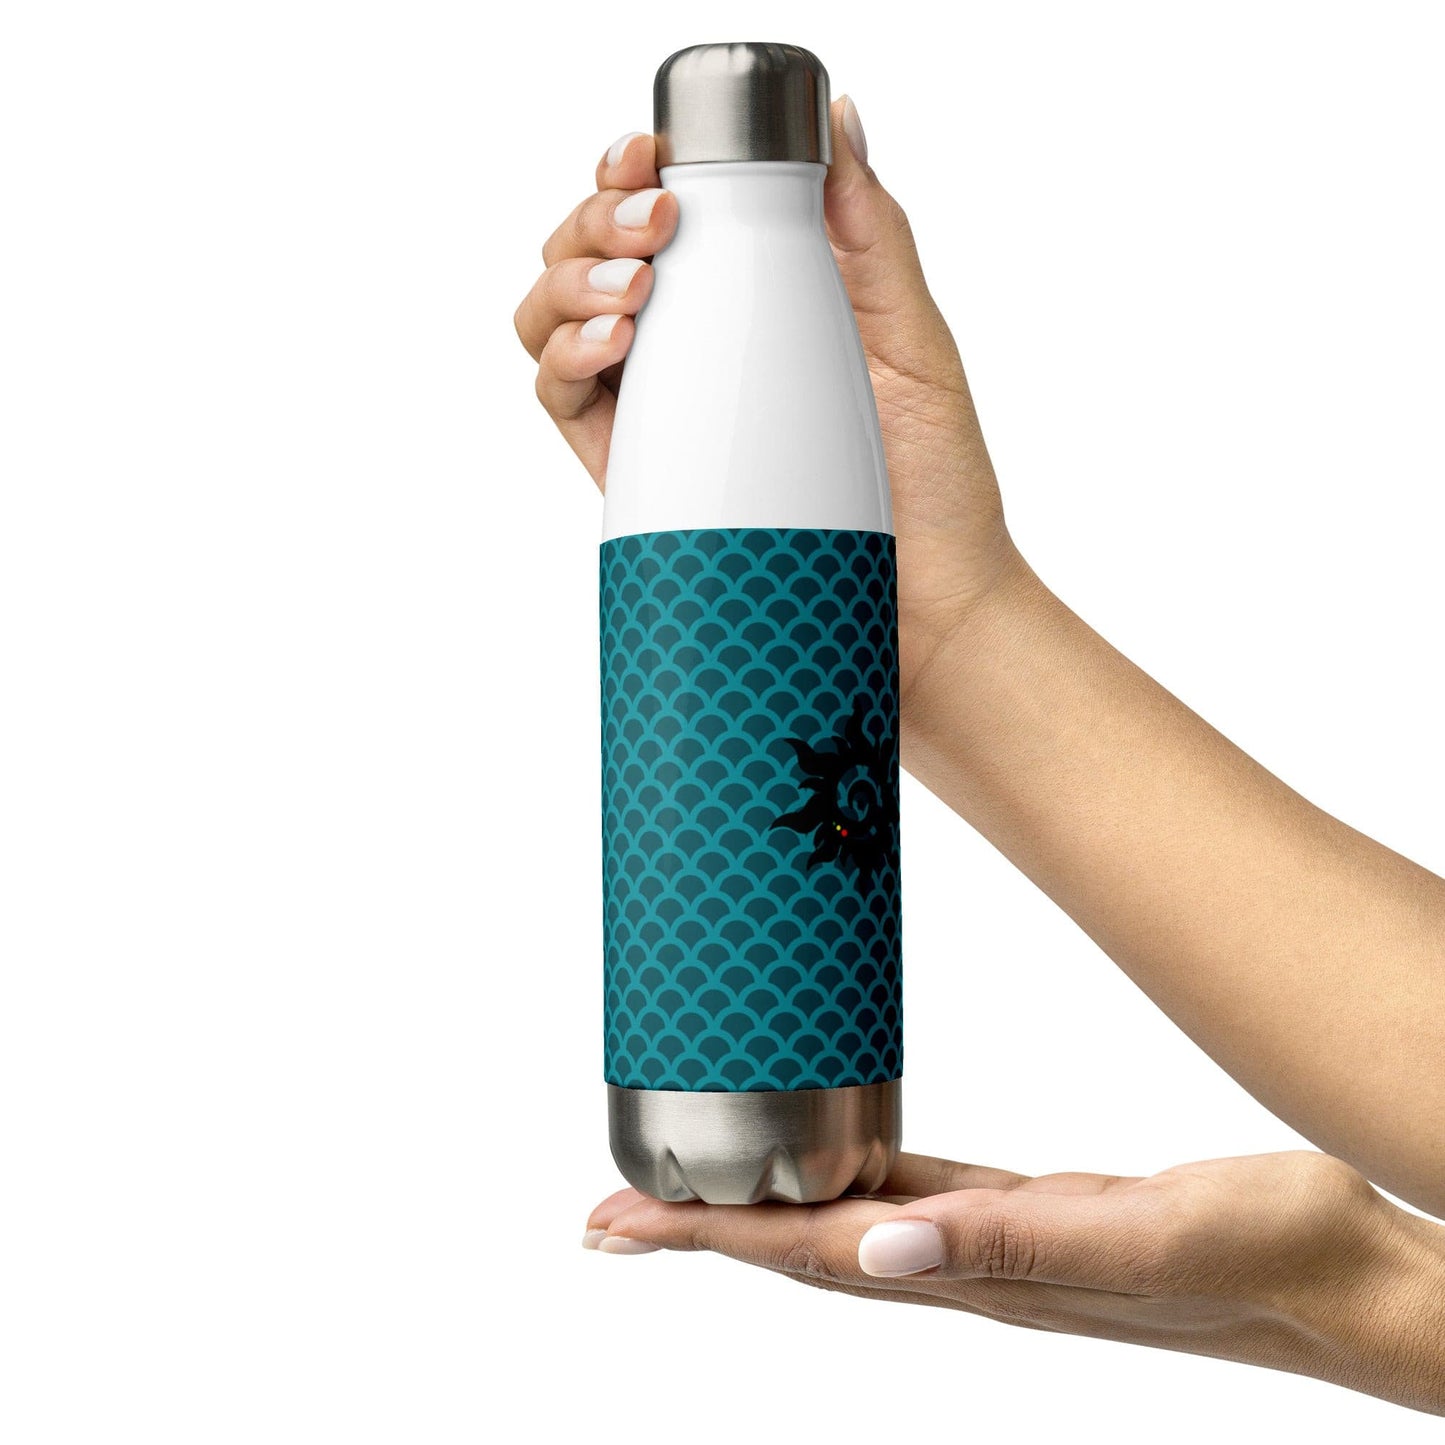 Action Stainless Steel Water Bottle2.